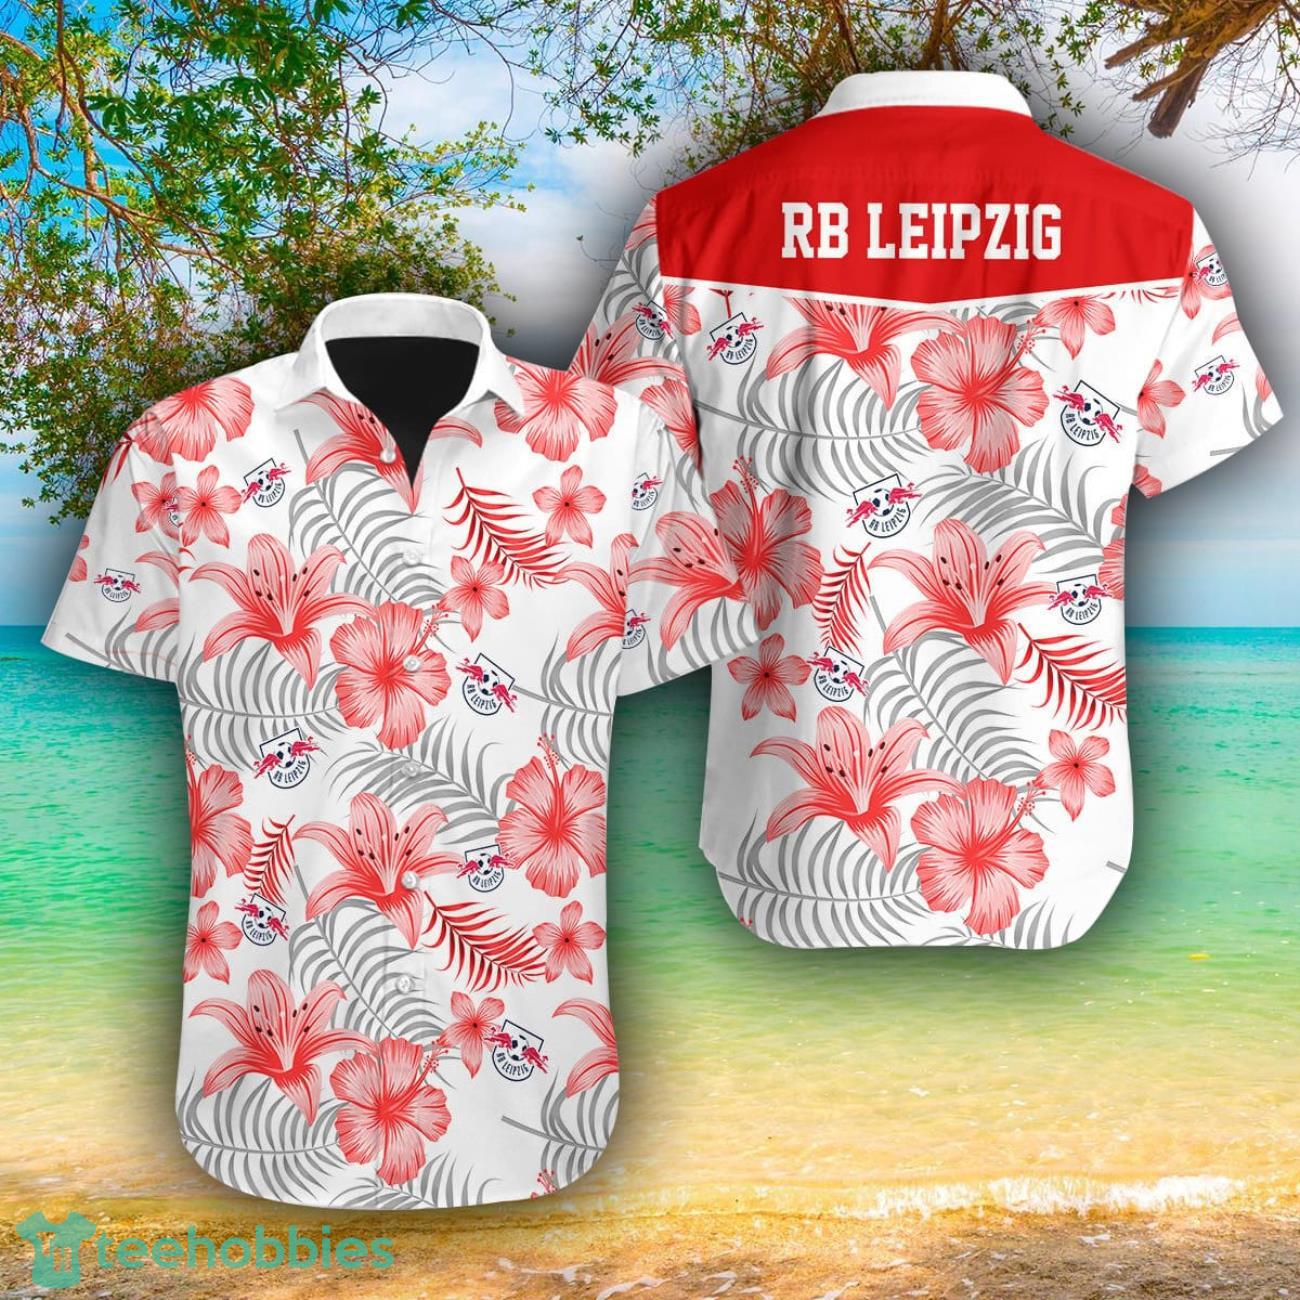 RB Leipzig AOP Hawaiian Shirt For Men And Women Summer Gift Product Photo 1